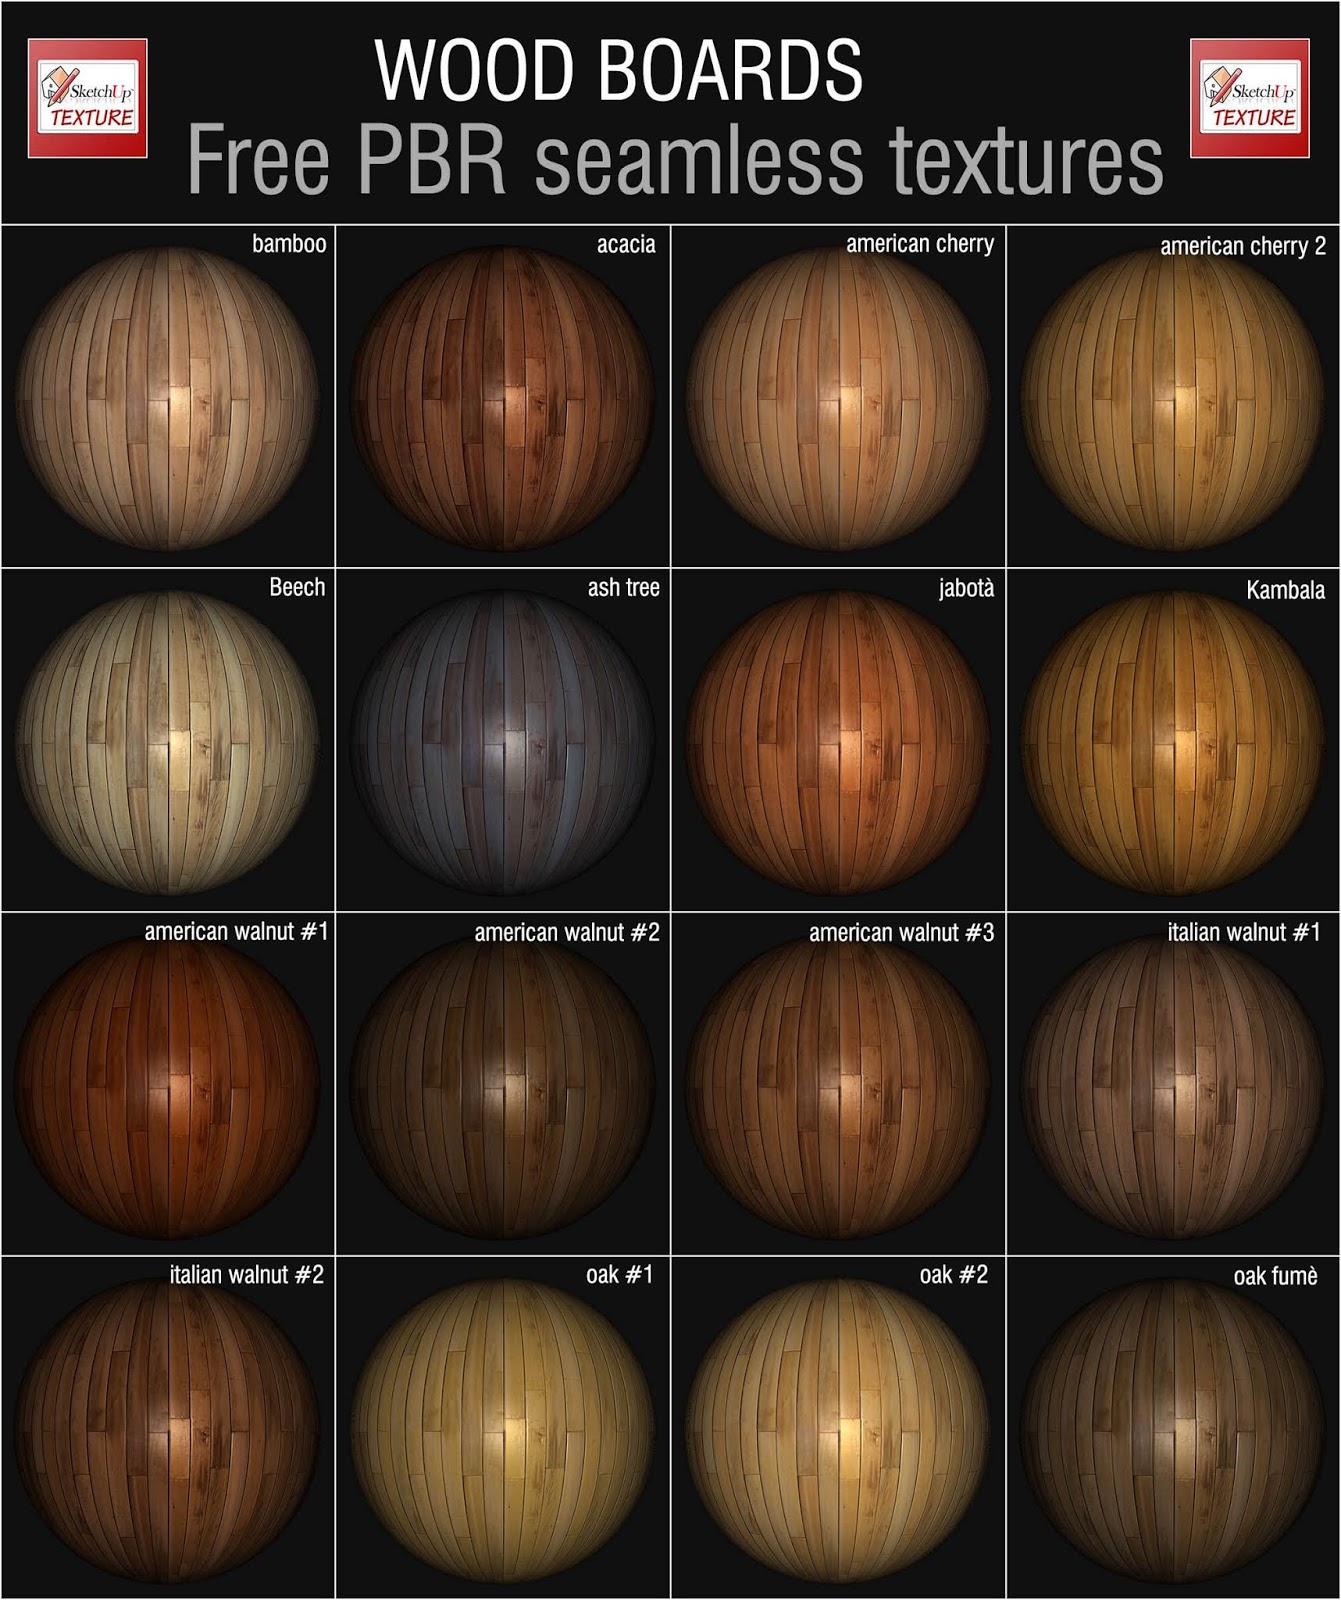 Sketchup Texture Free Pack Wood Boards Pbr Seamless Textures